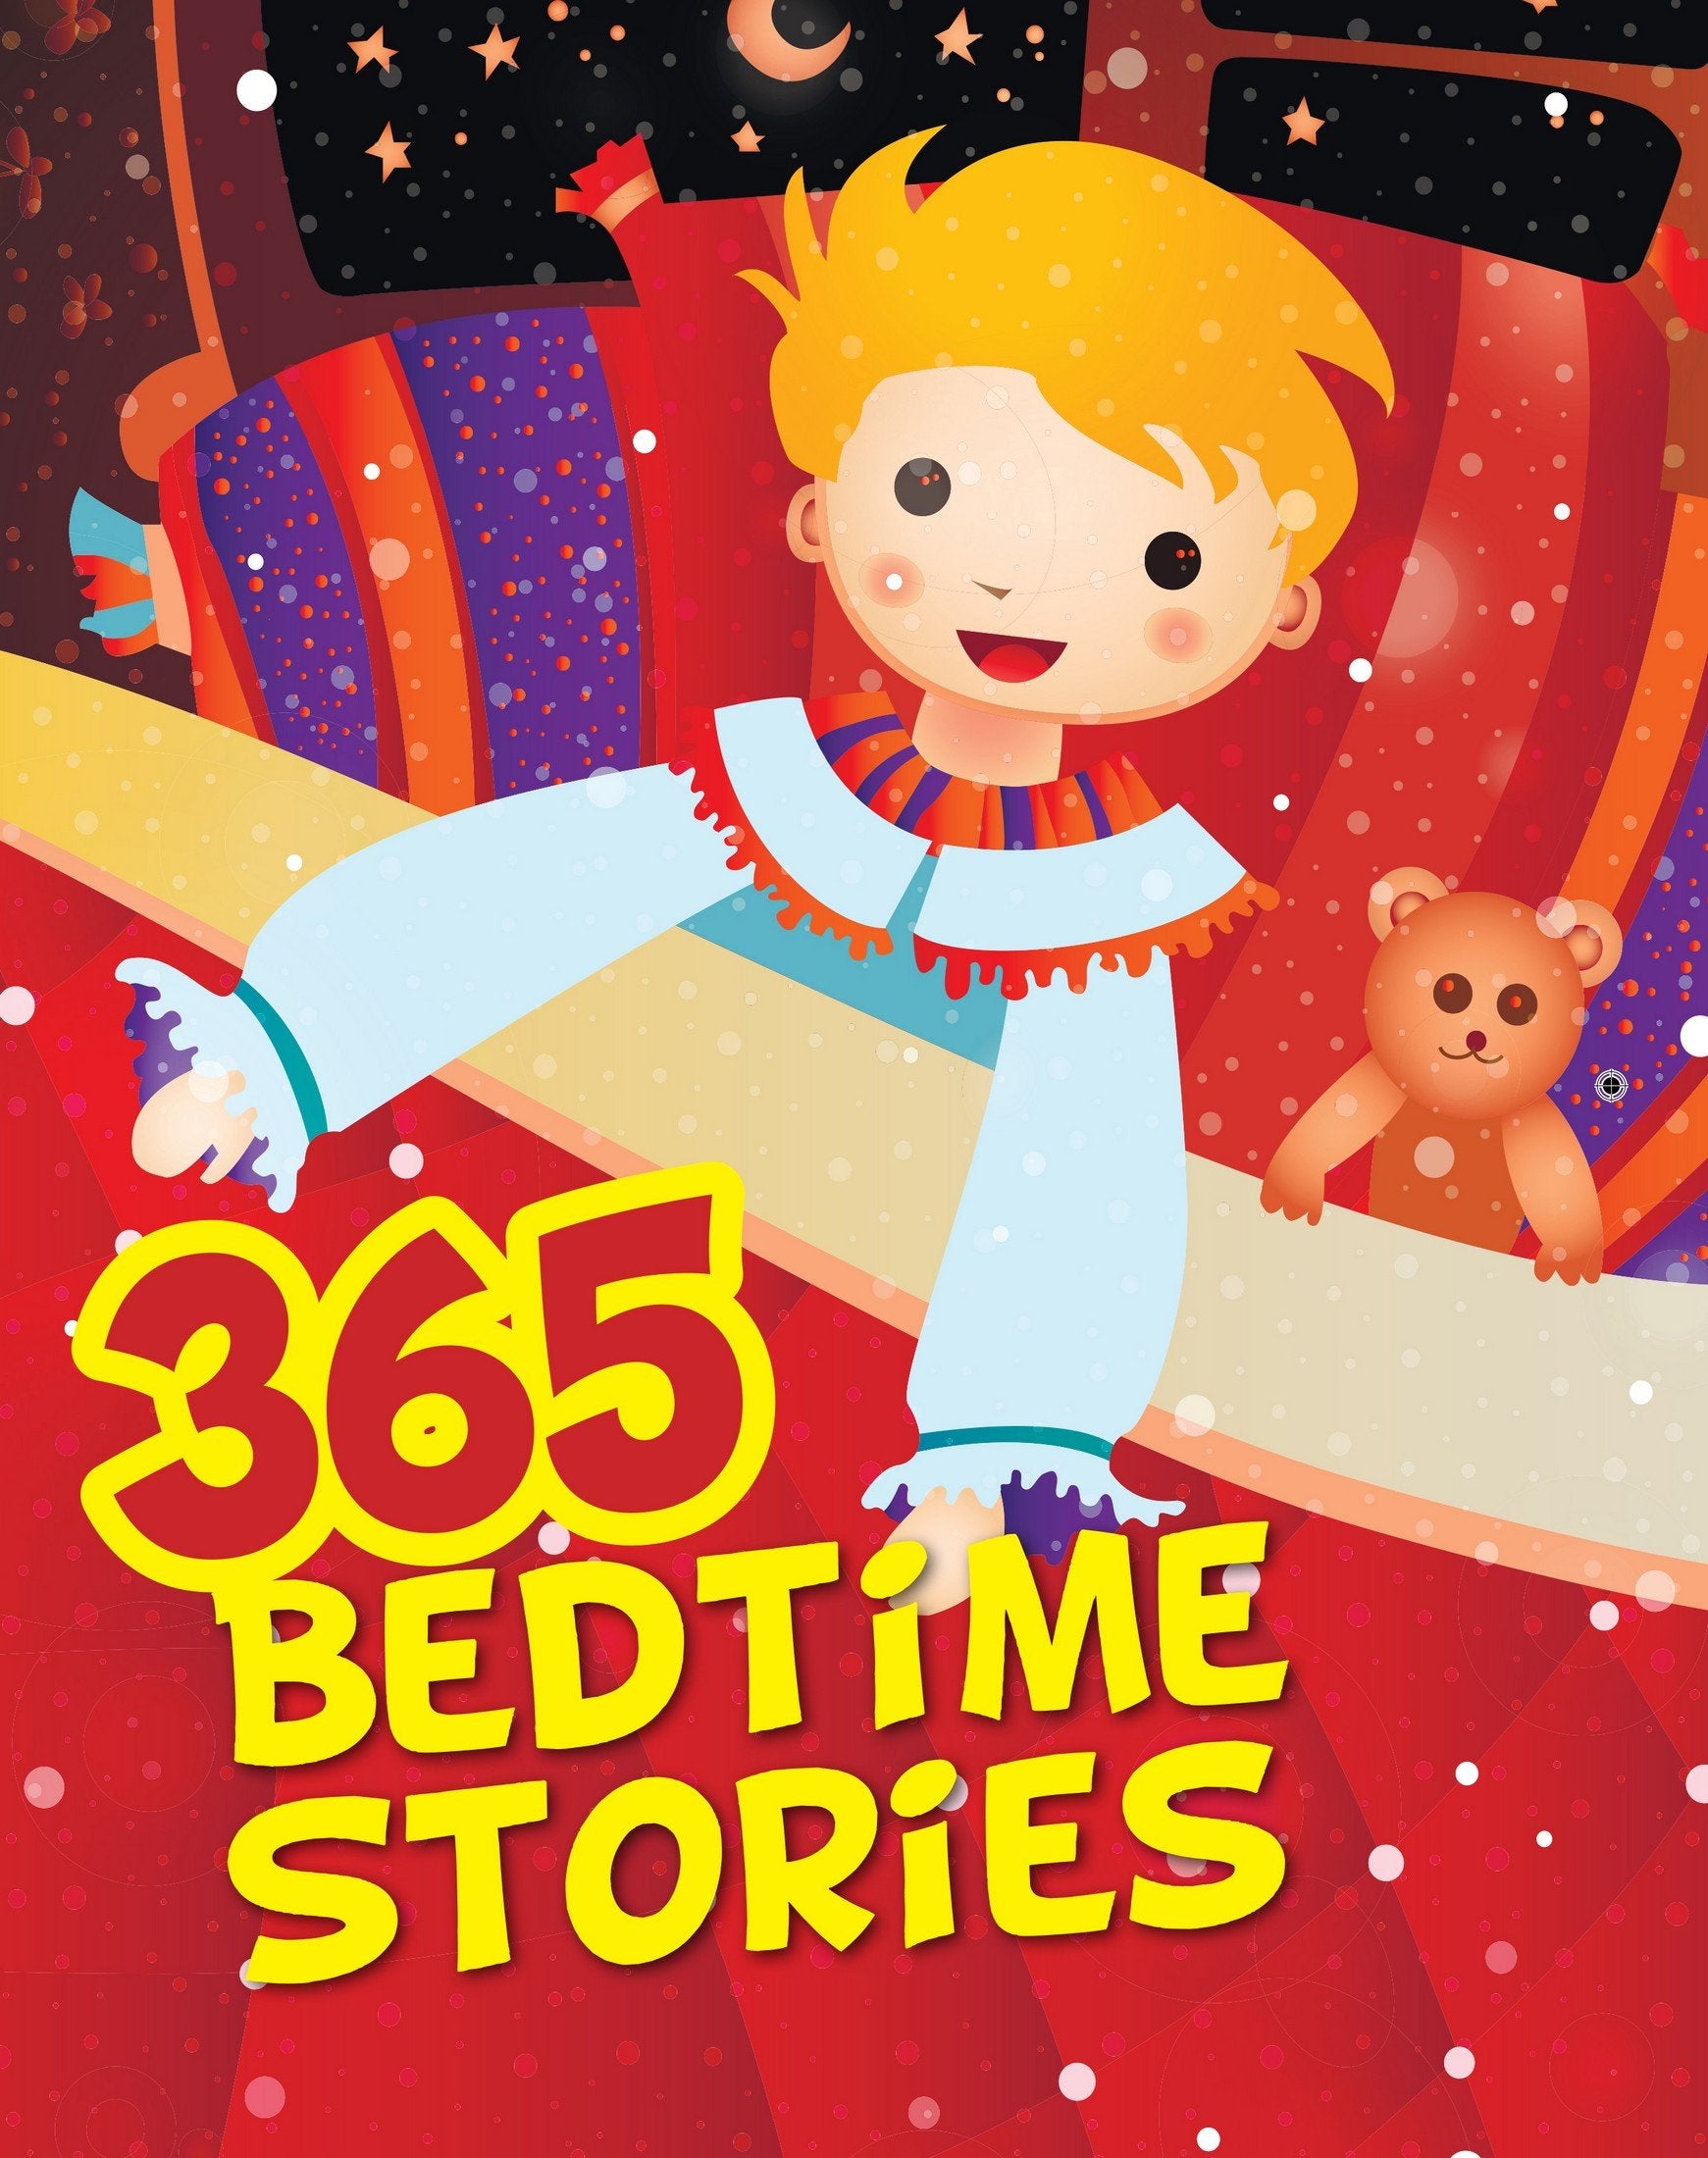 Online 365 Bedtime Stories At